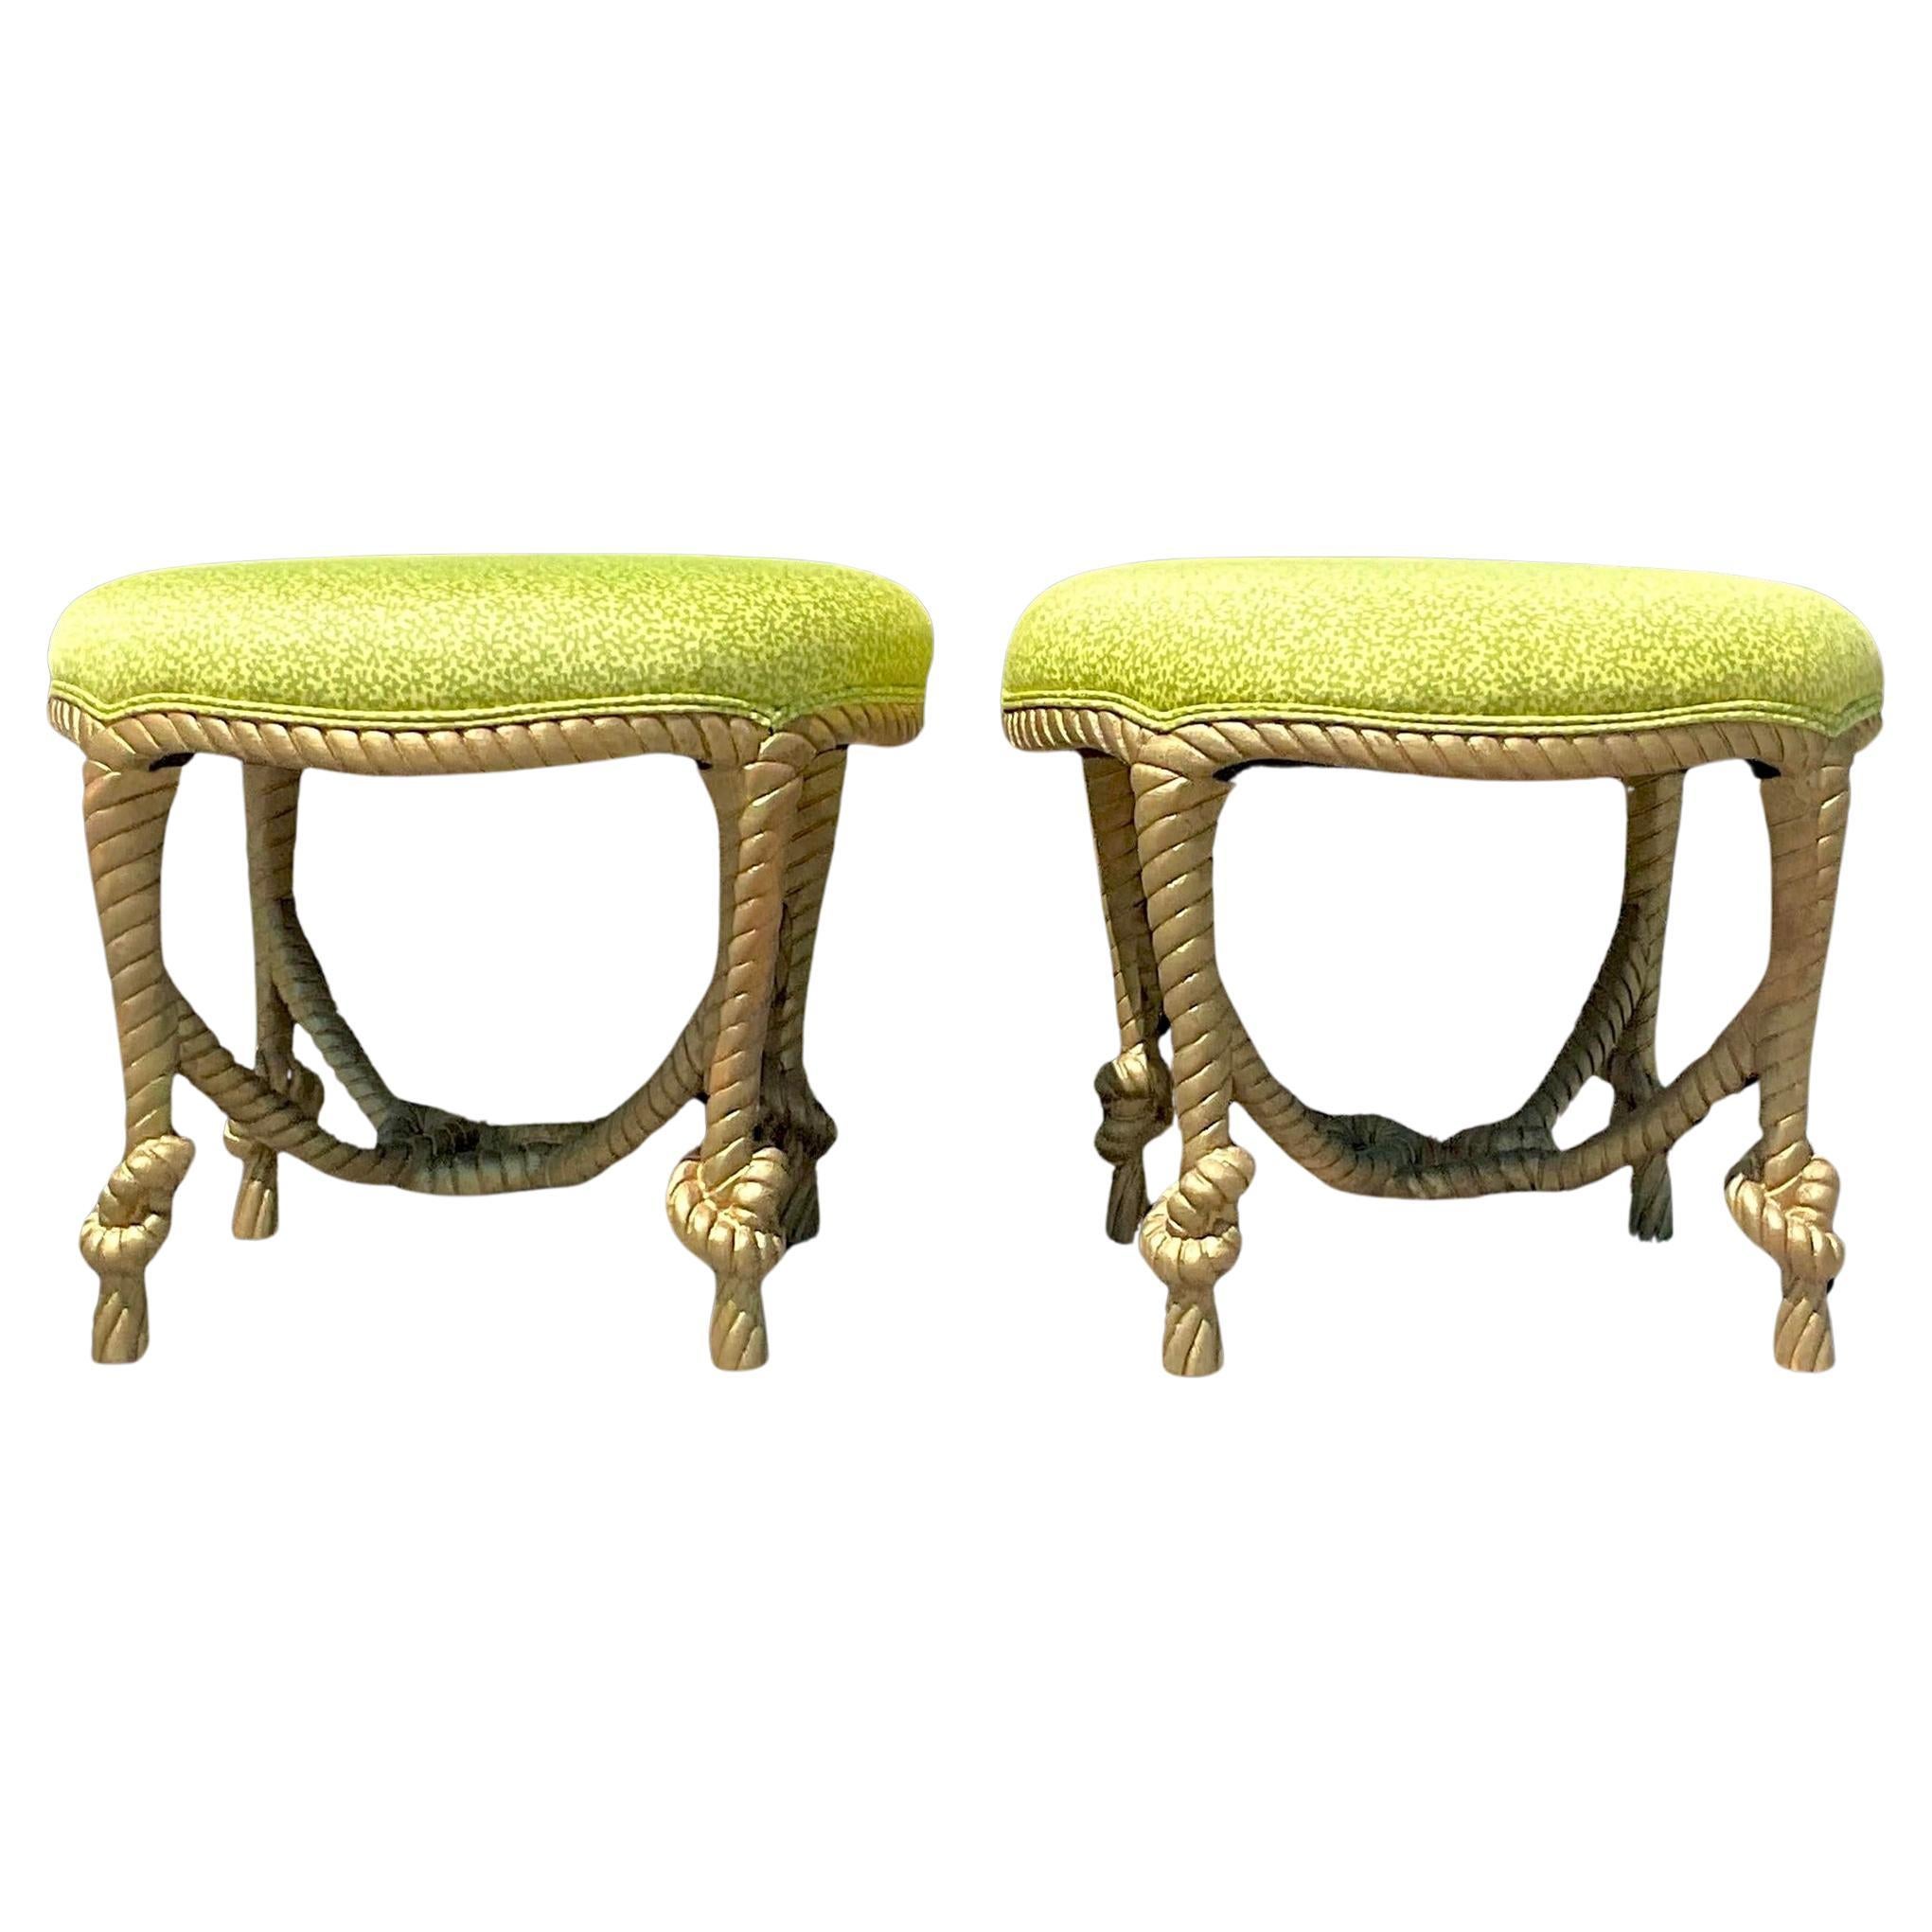 Vintage Boho Carved Rope and Knot Stools - a Pair